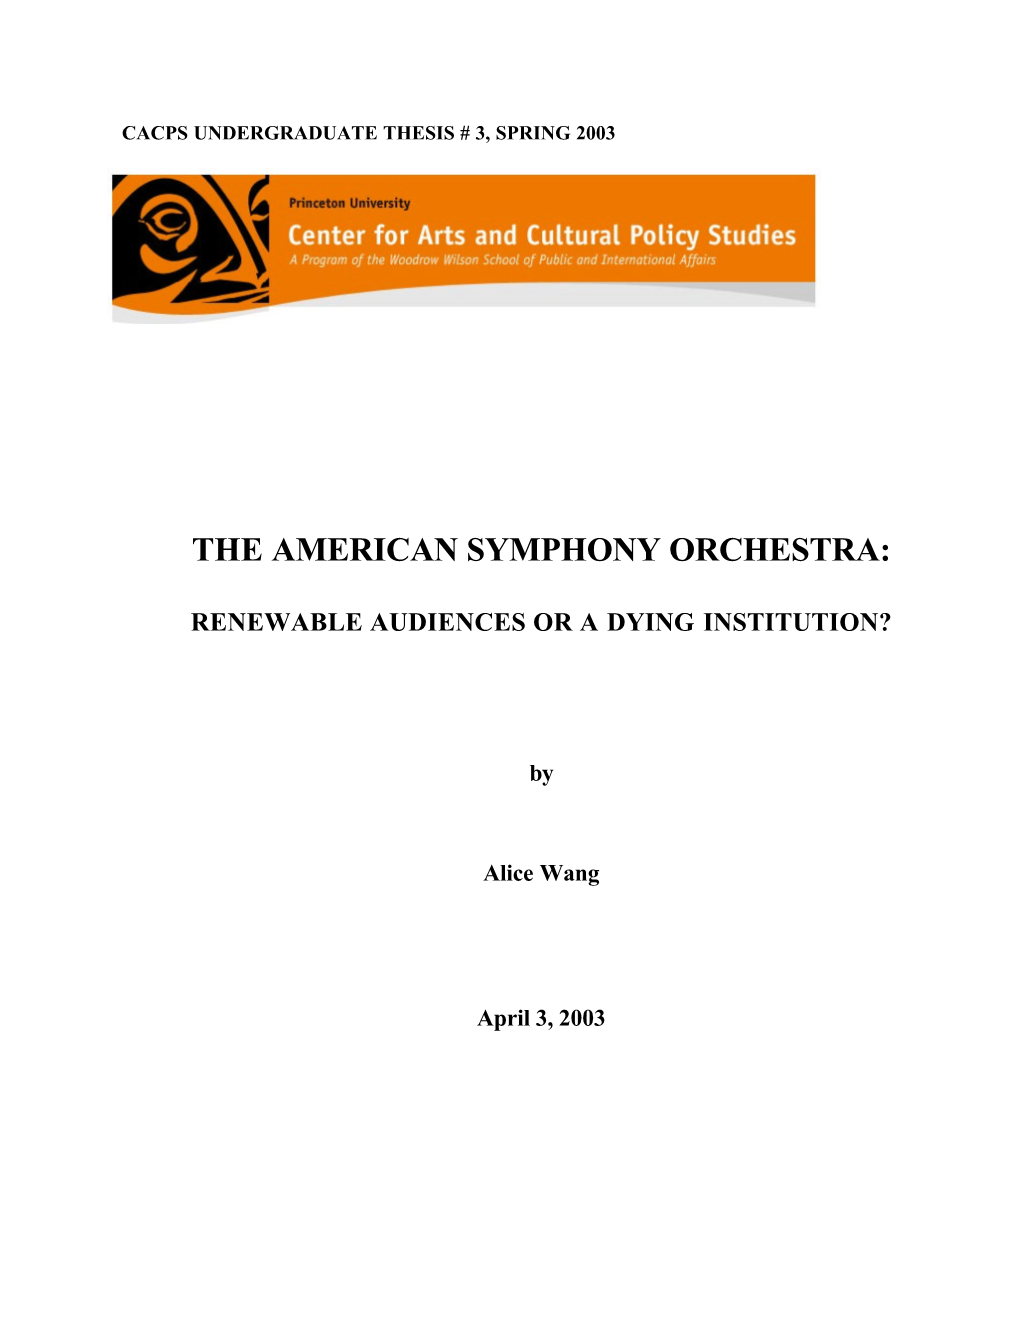 The American Symphony Orchestra